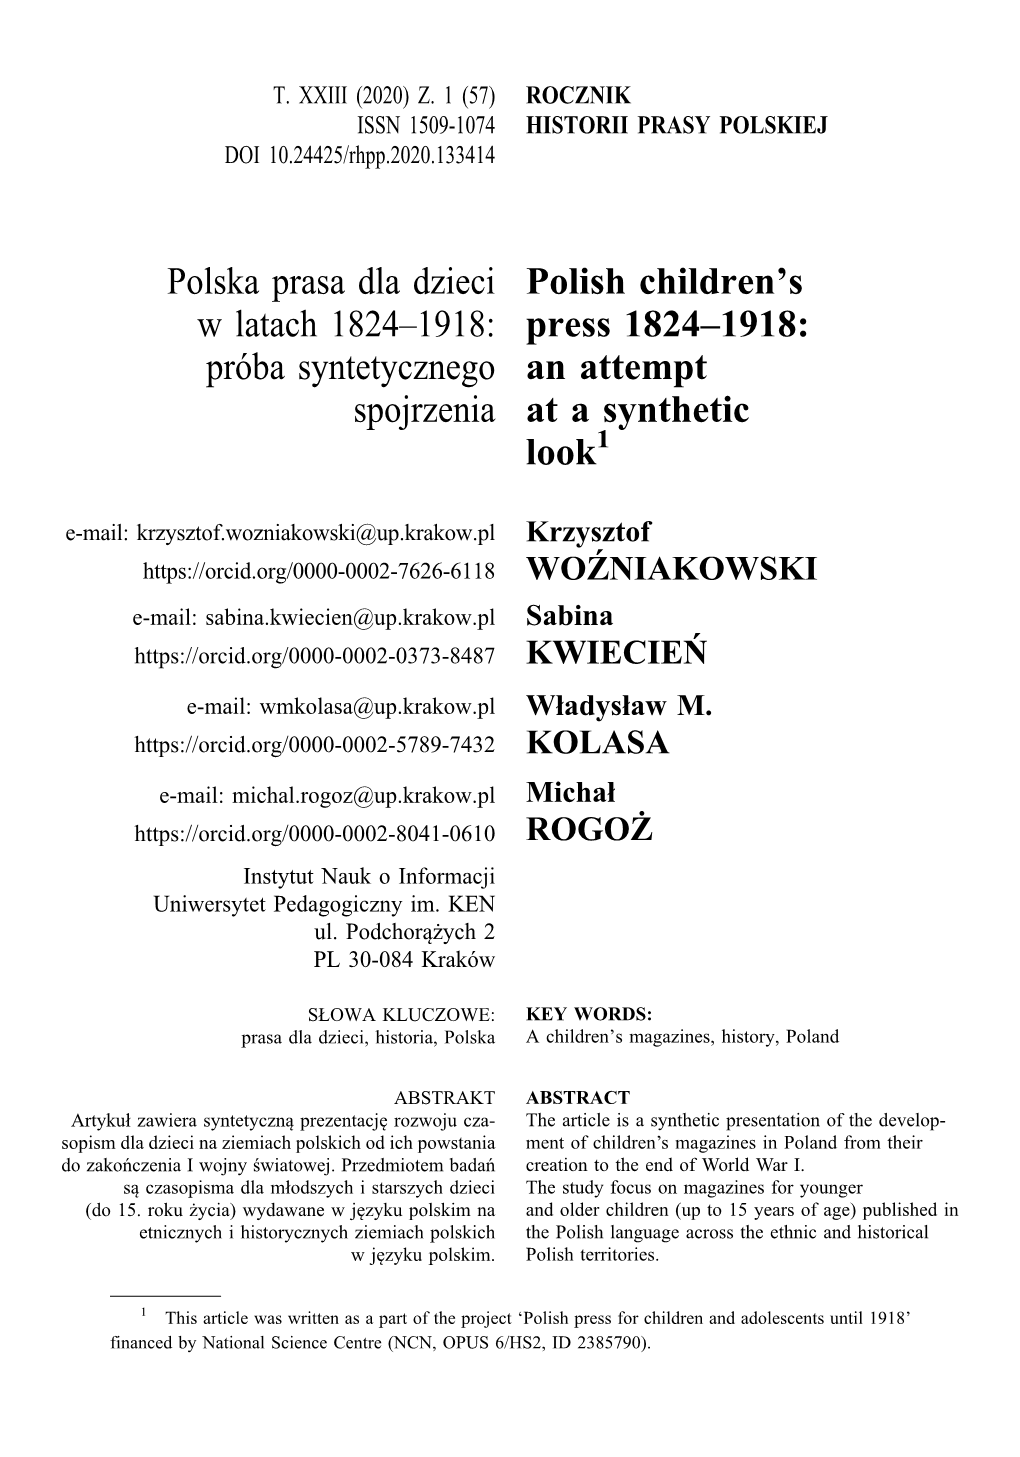 Polish Children's Press 1824–1918: an Attempt at a Synthetic Look